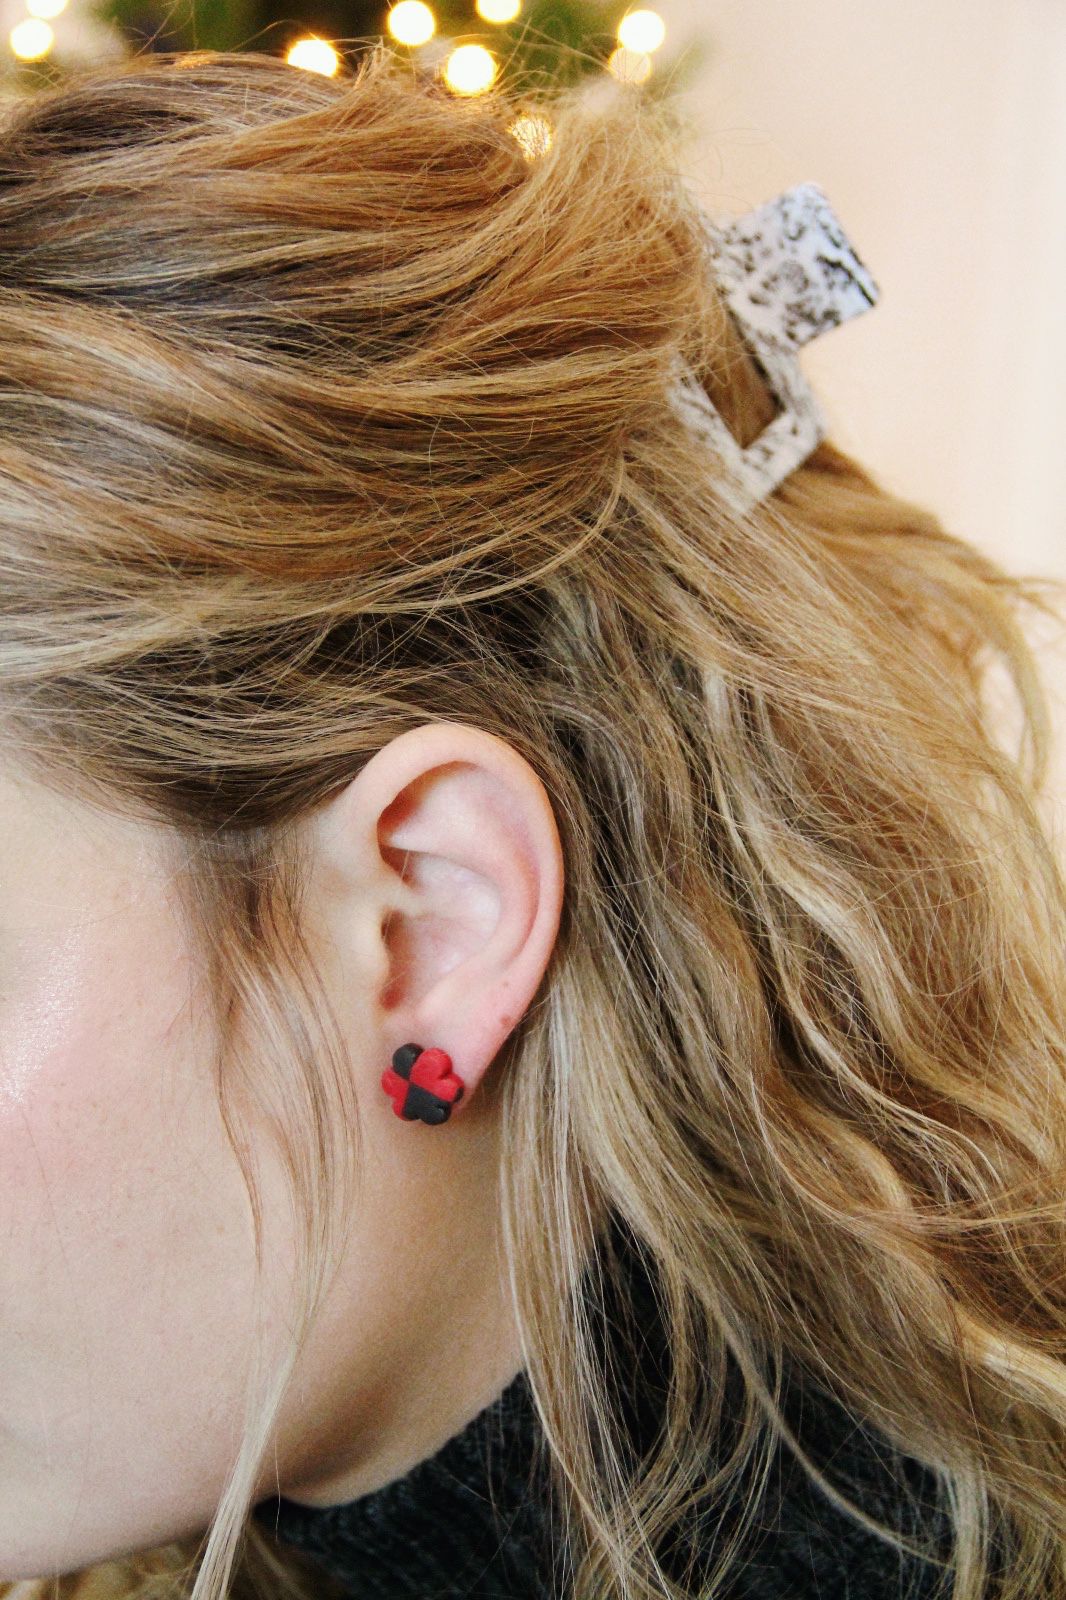 DAISY stud earrings - Checkered red and black